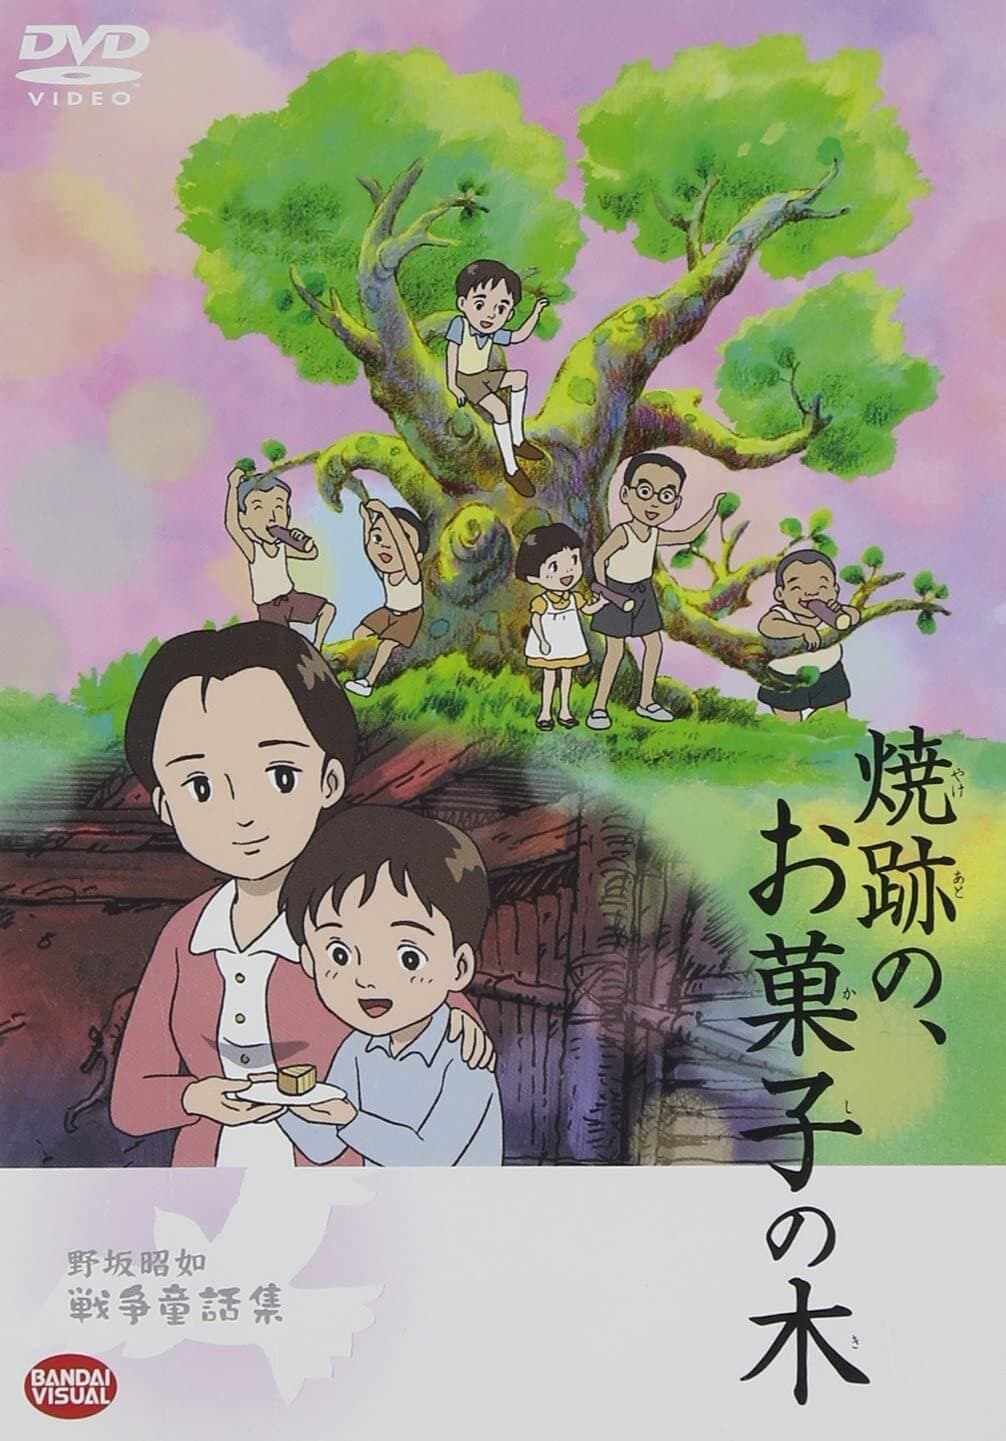 The Cake Tree in the Ruins (2006)